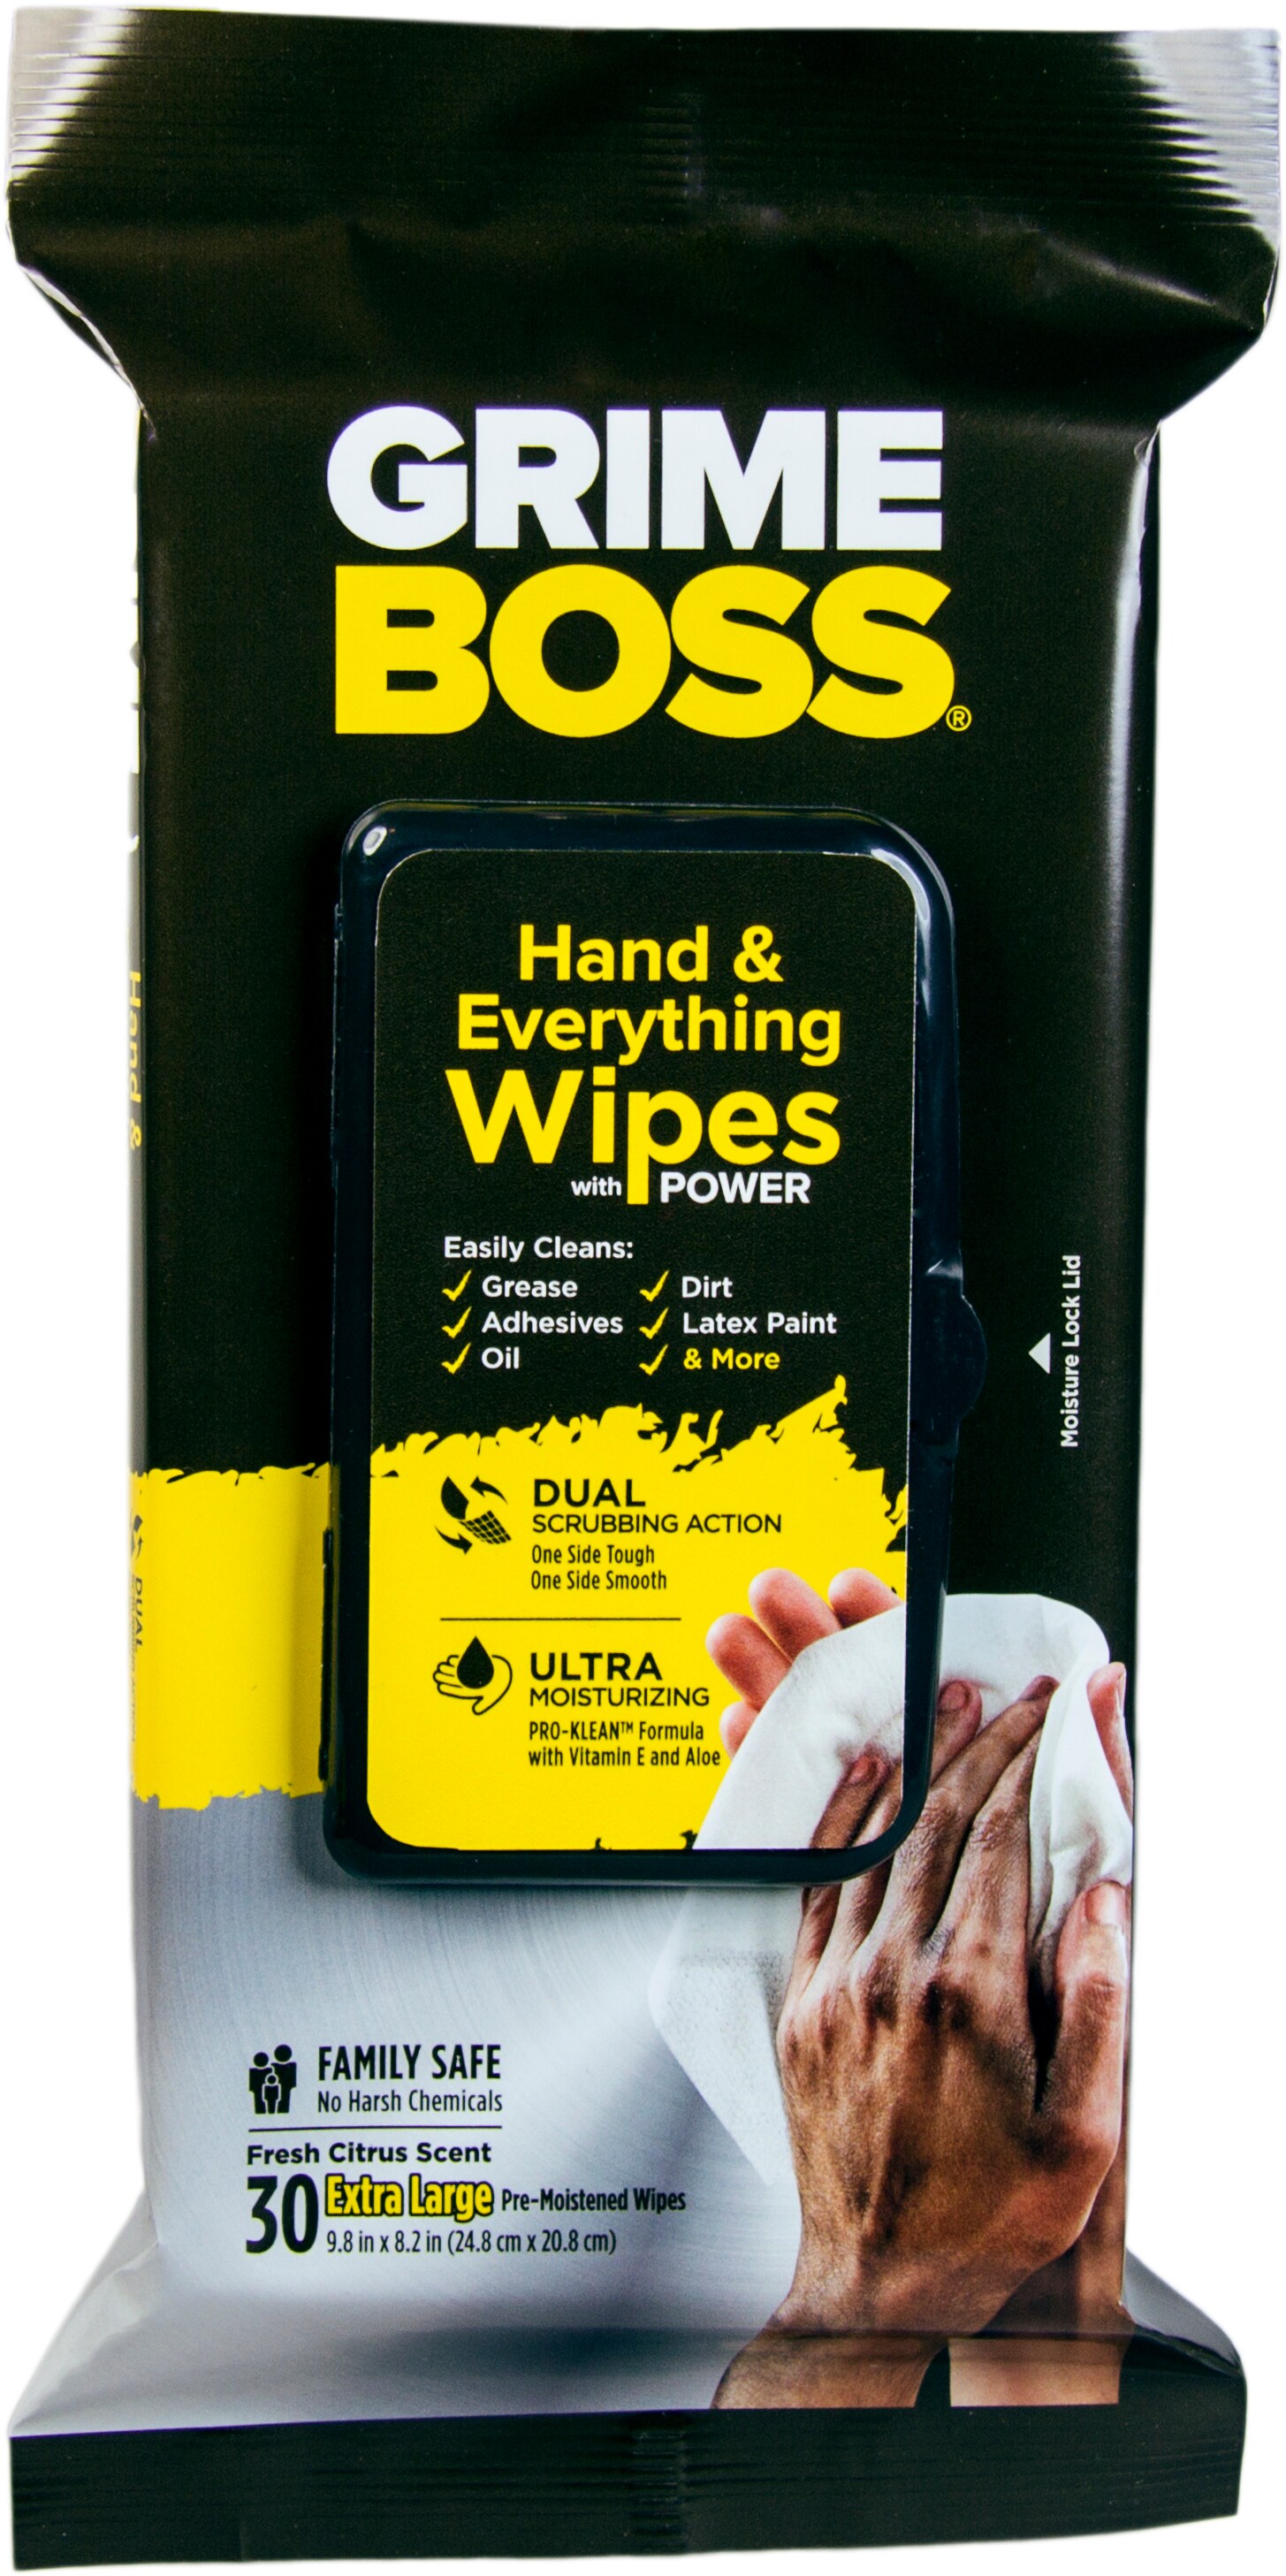 Review: Grime Boss Heavy Duty Hand Wipes